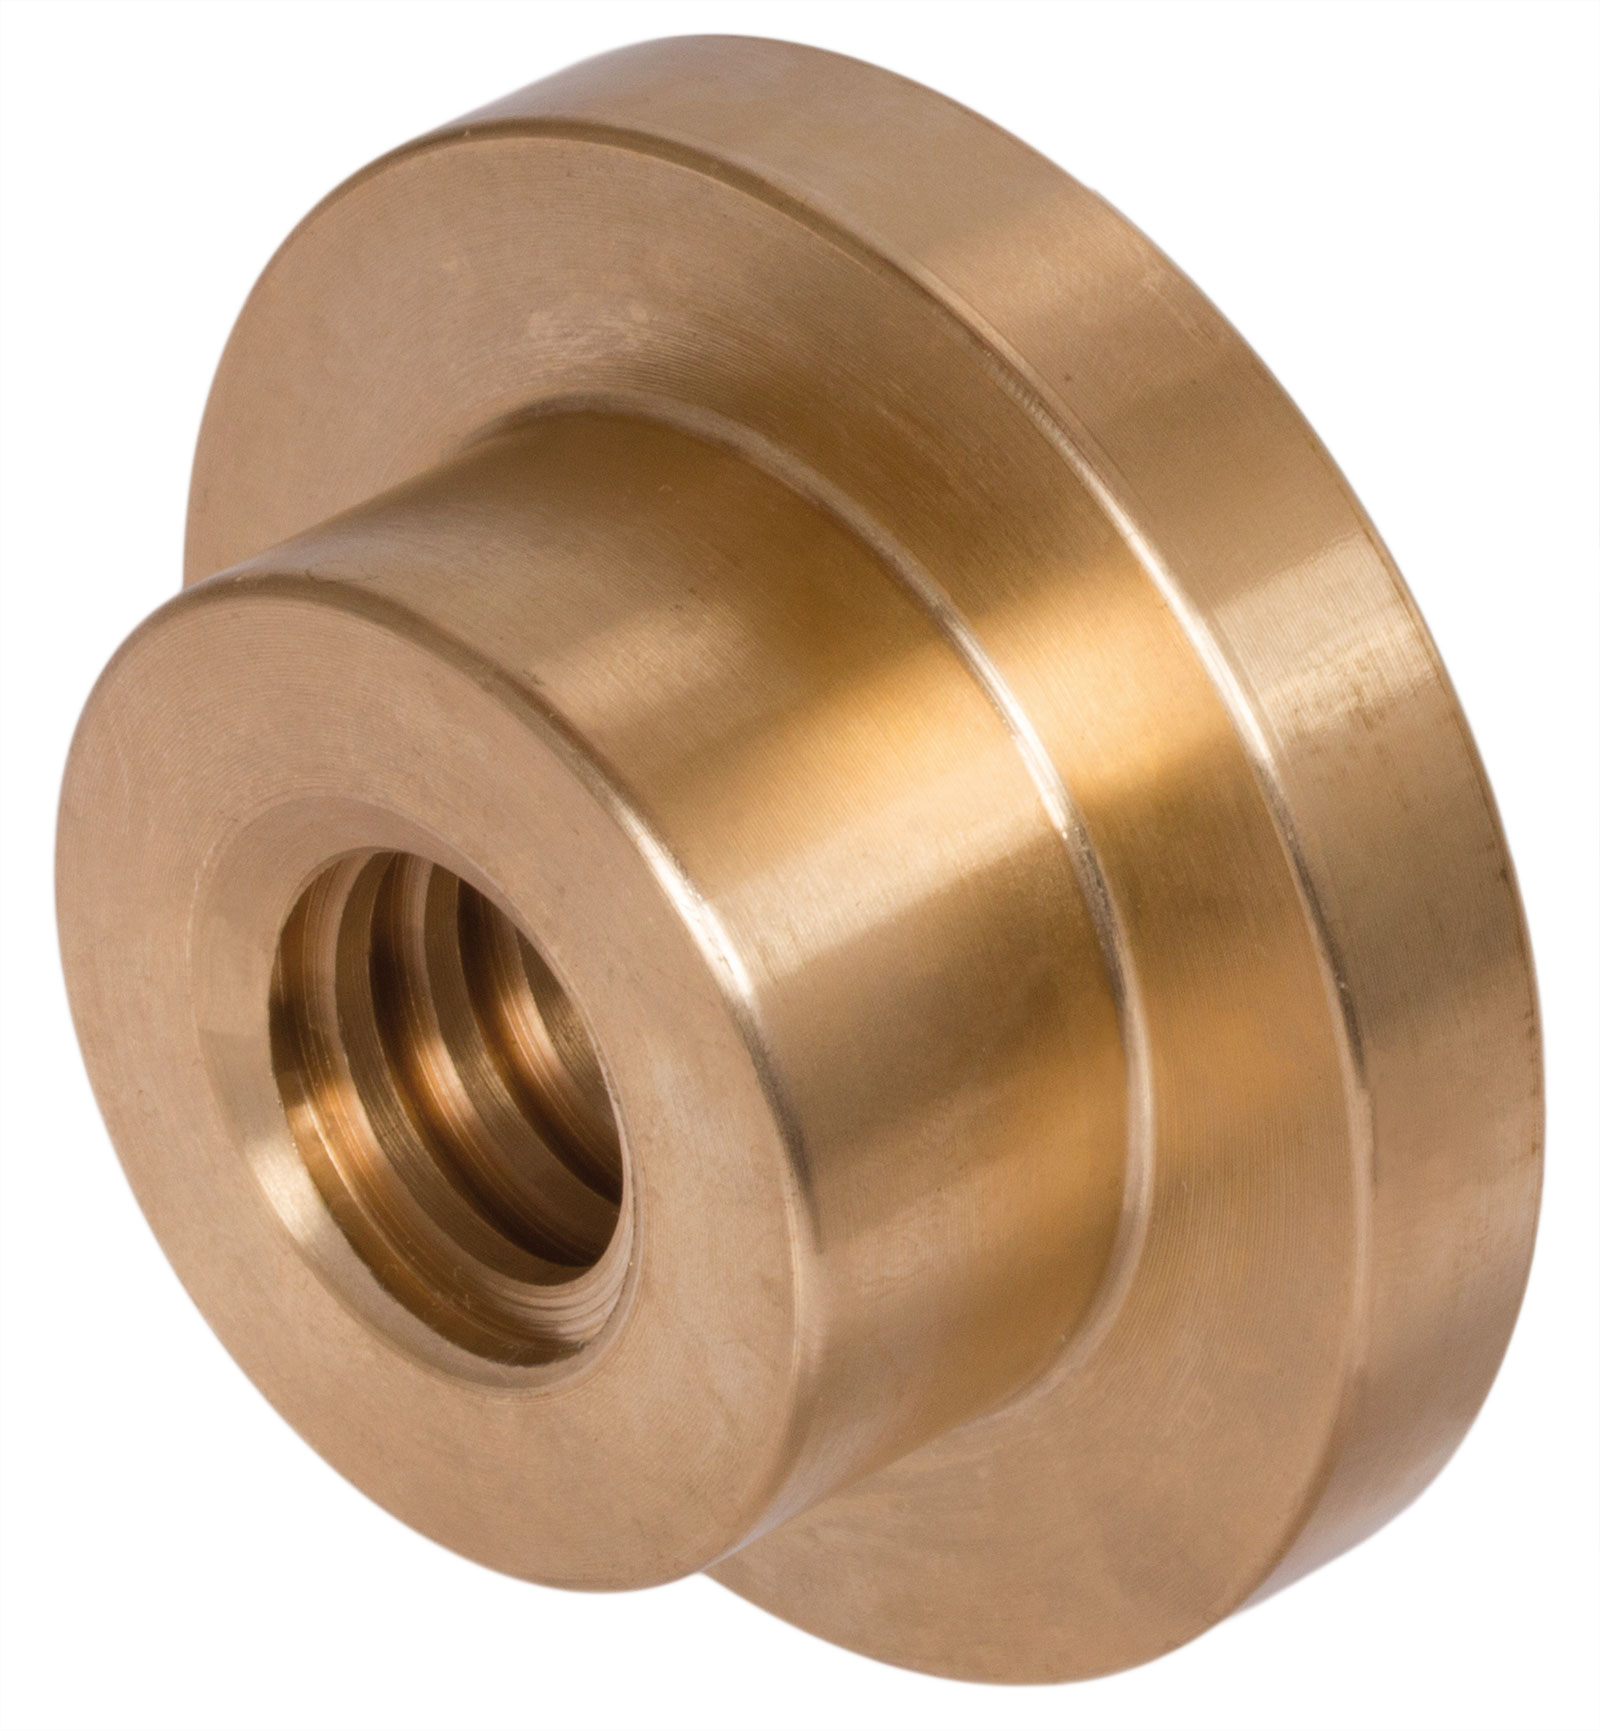 Details about   Tr44x7-RH Flanged Bronze Trapezoidal Nut 44 mm Spindle 7 mm Pitch Right Handed 